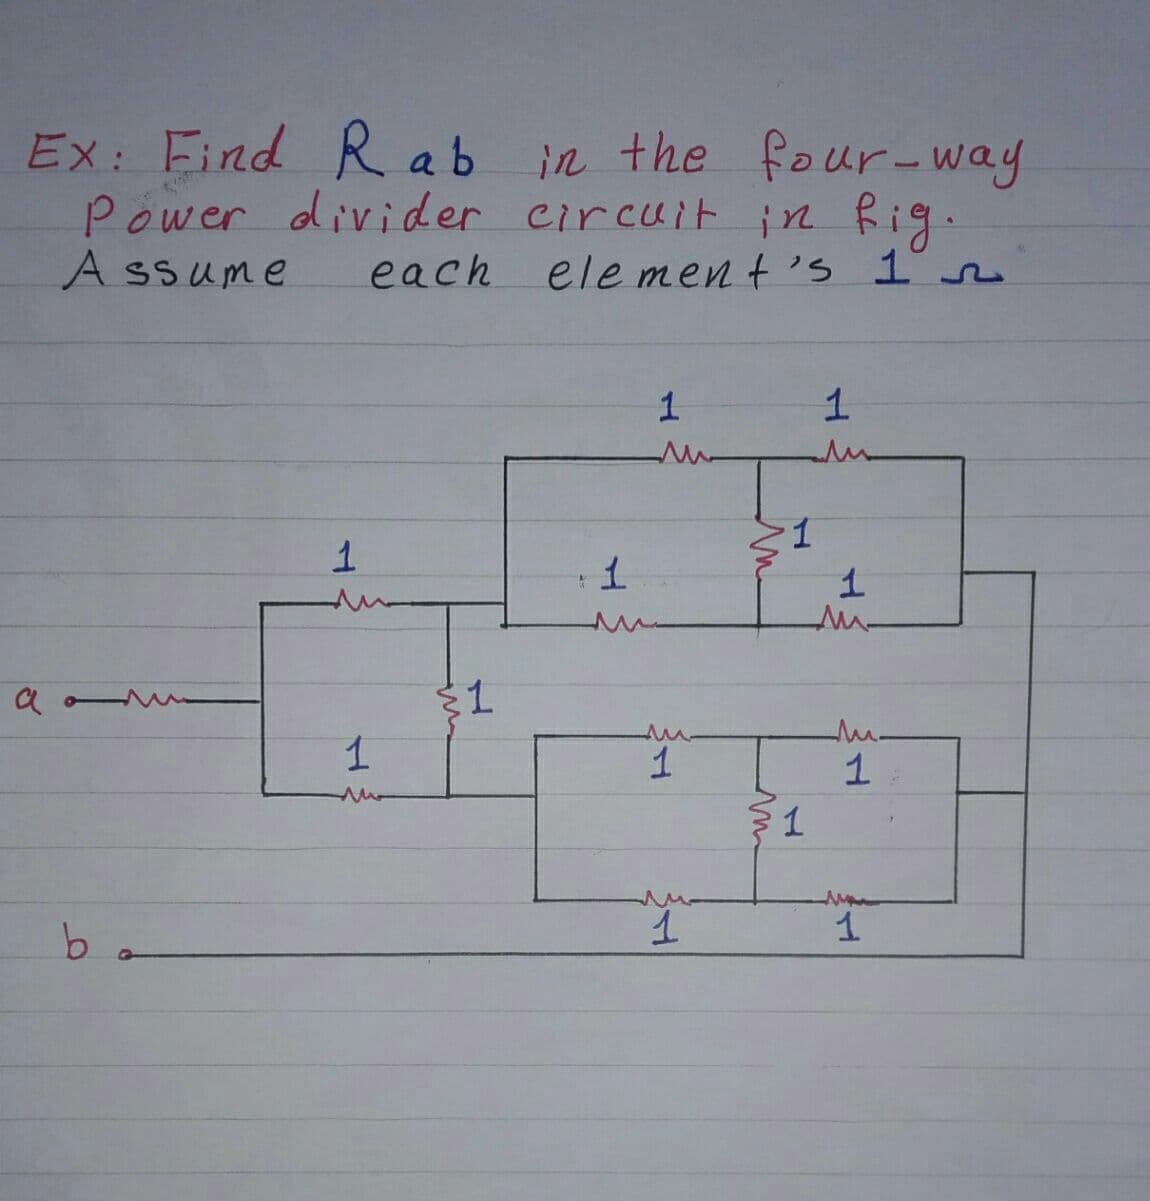 Ex: Find R ab
Power divider circuit in Rig.
A ssume
in the four-way
each
ele men t's 1n
un
1
1
a
1
ba
l.
